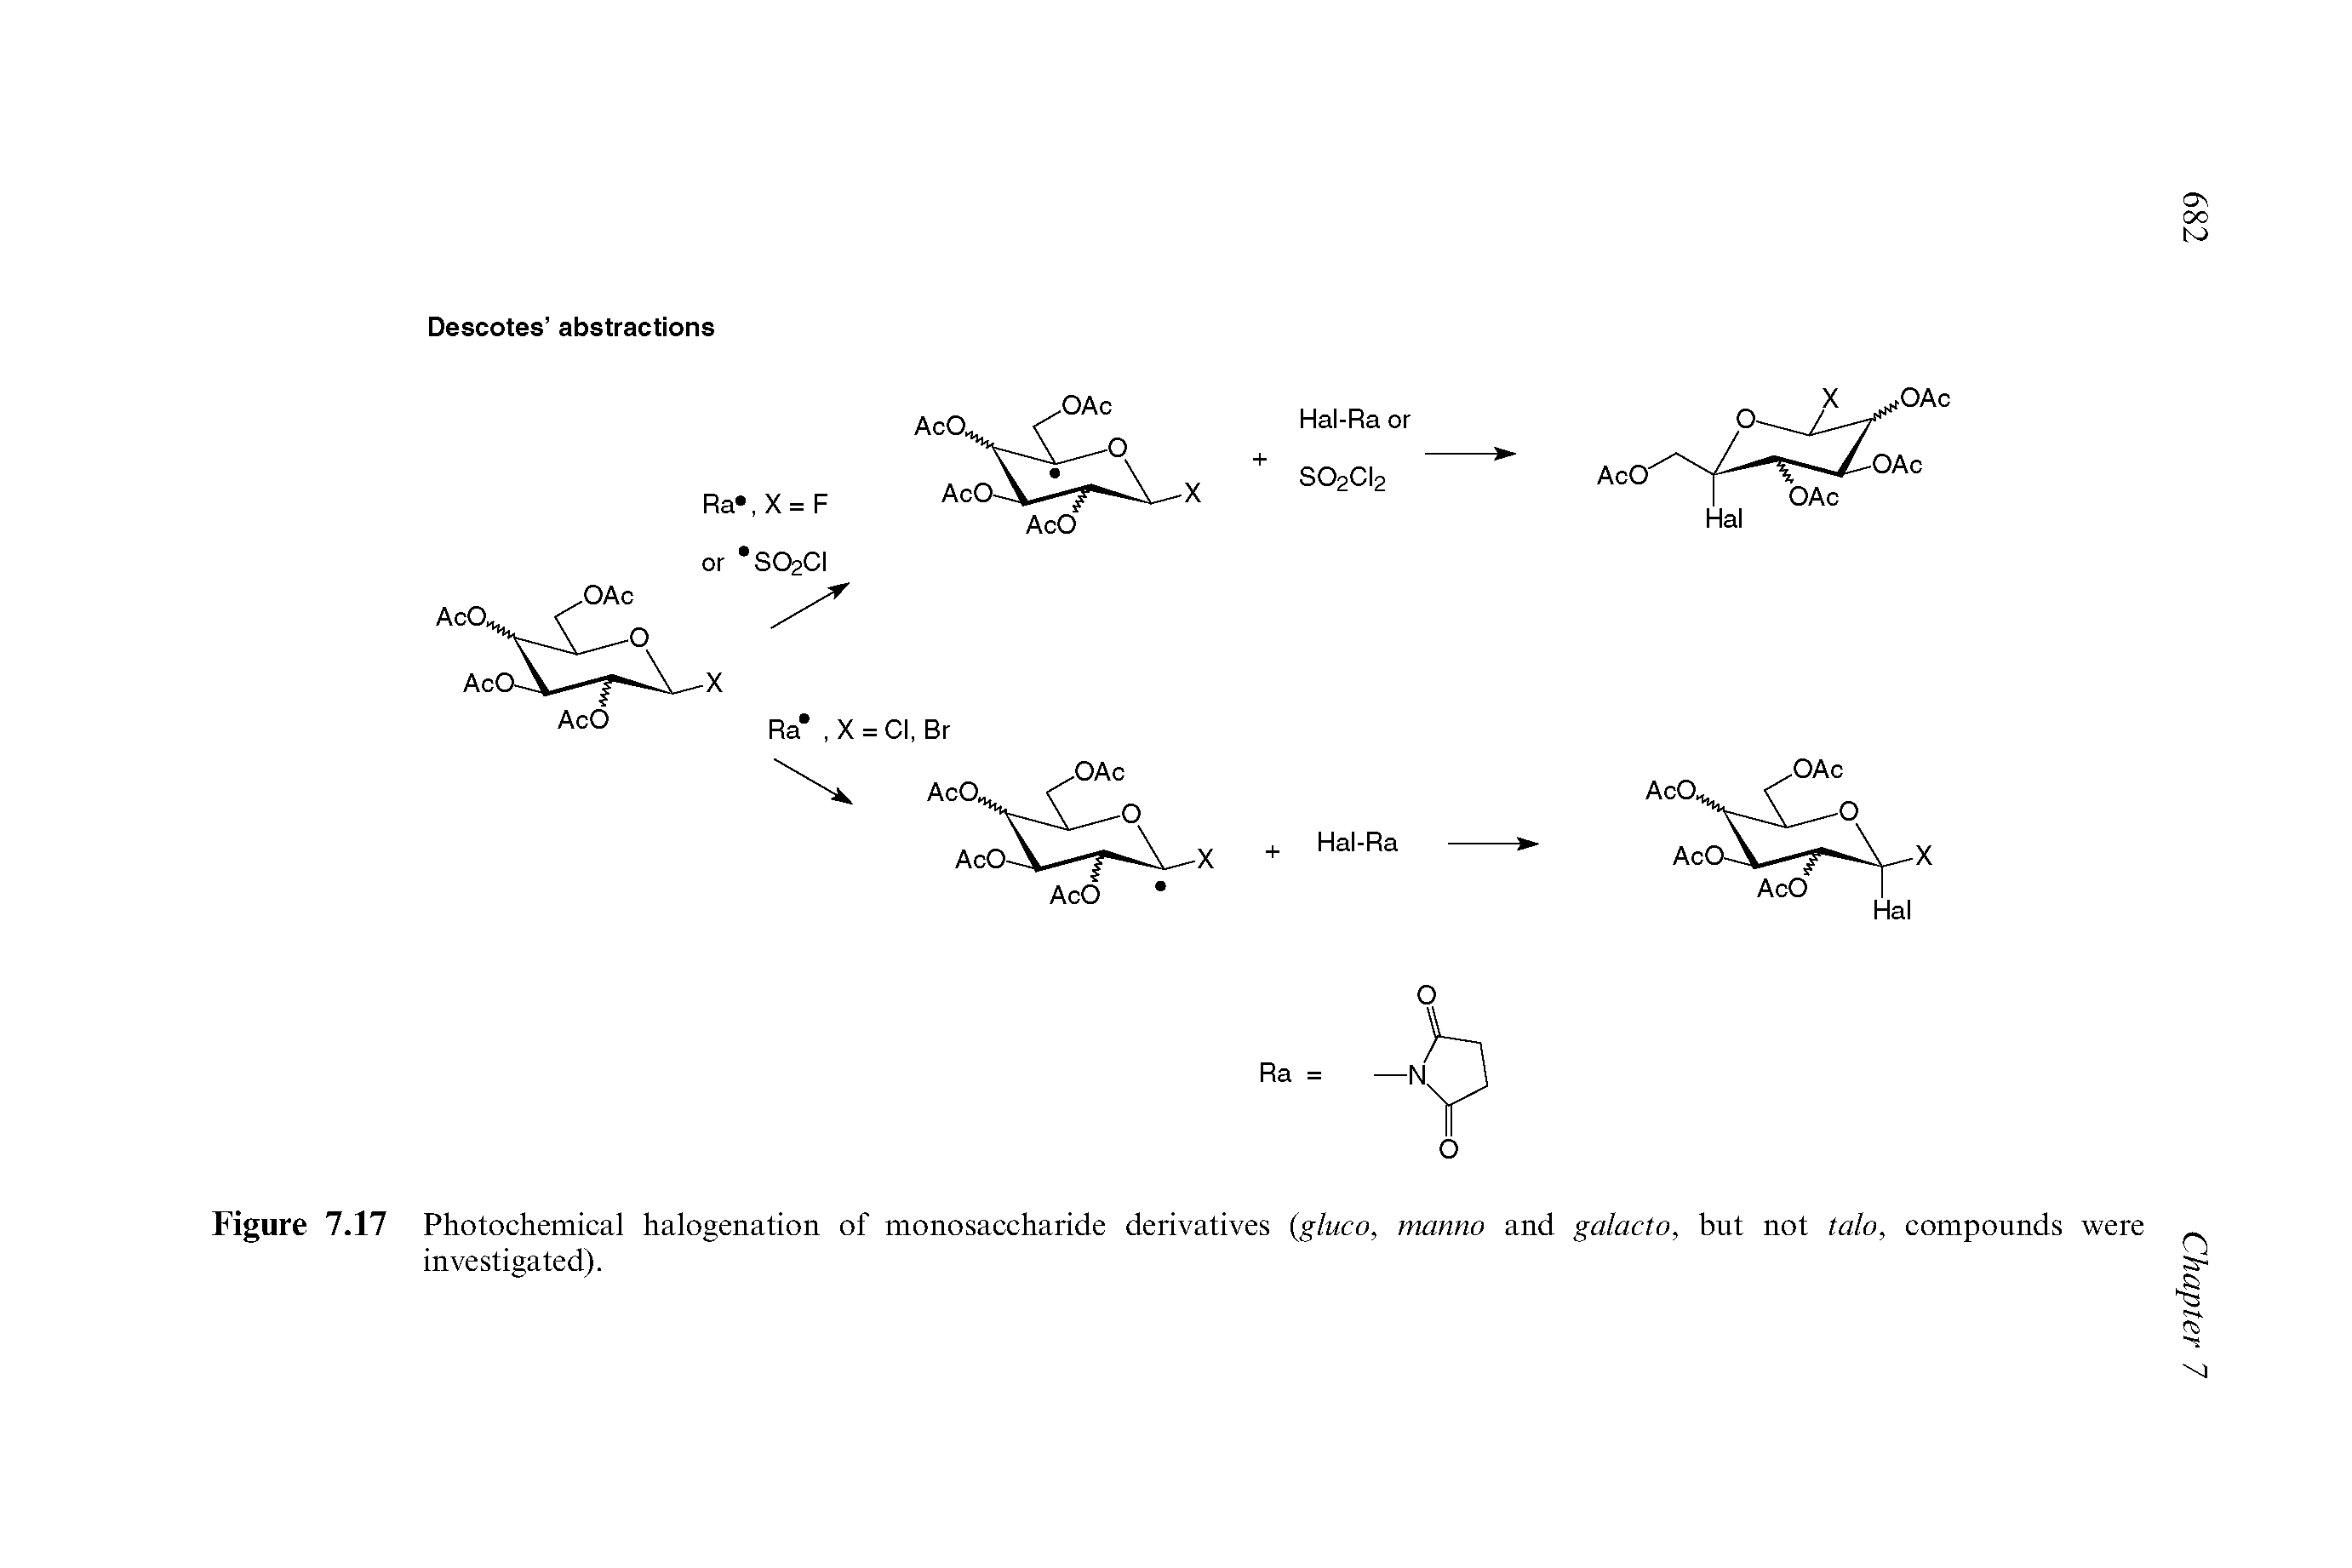 Figure 7.17 Photochemical halogenation of monosaccharide derivatives (gluco, manno and galacto, but not talo, compounds were investigated).